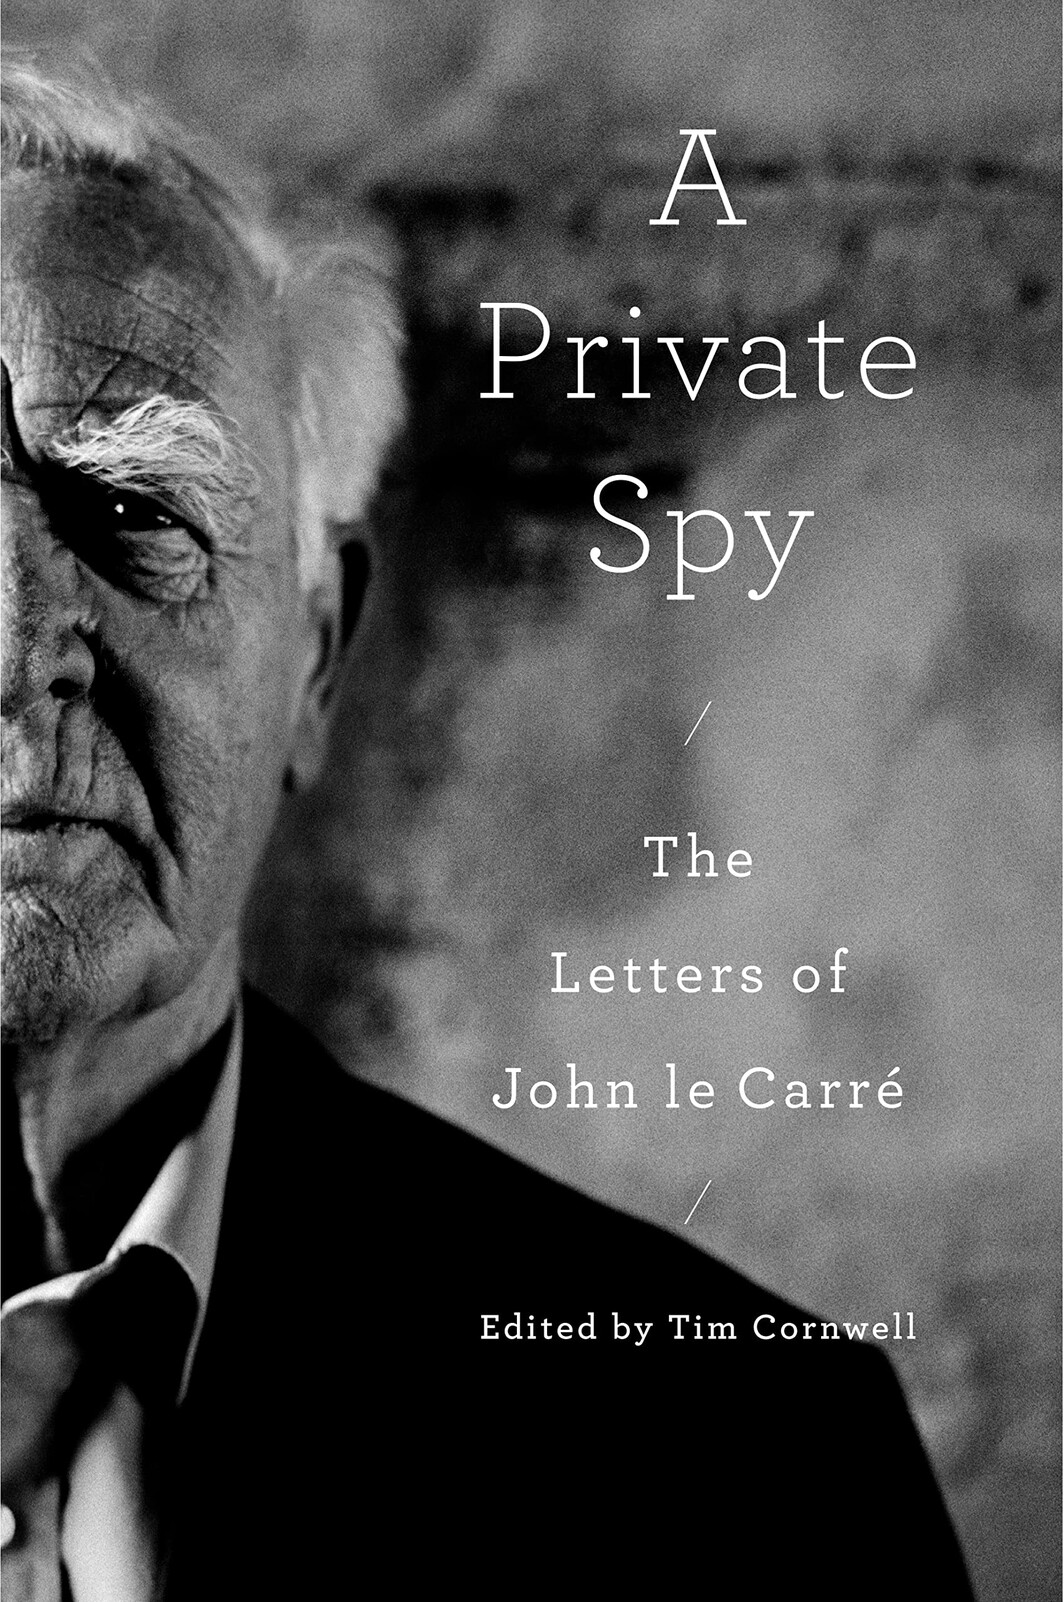 The cover of A Private Spy: The Letters of John le Carré